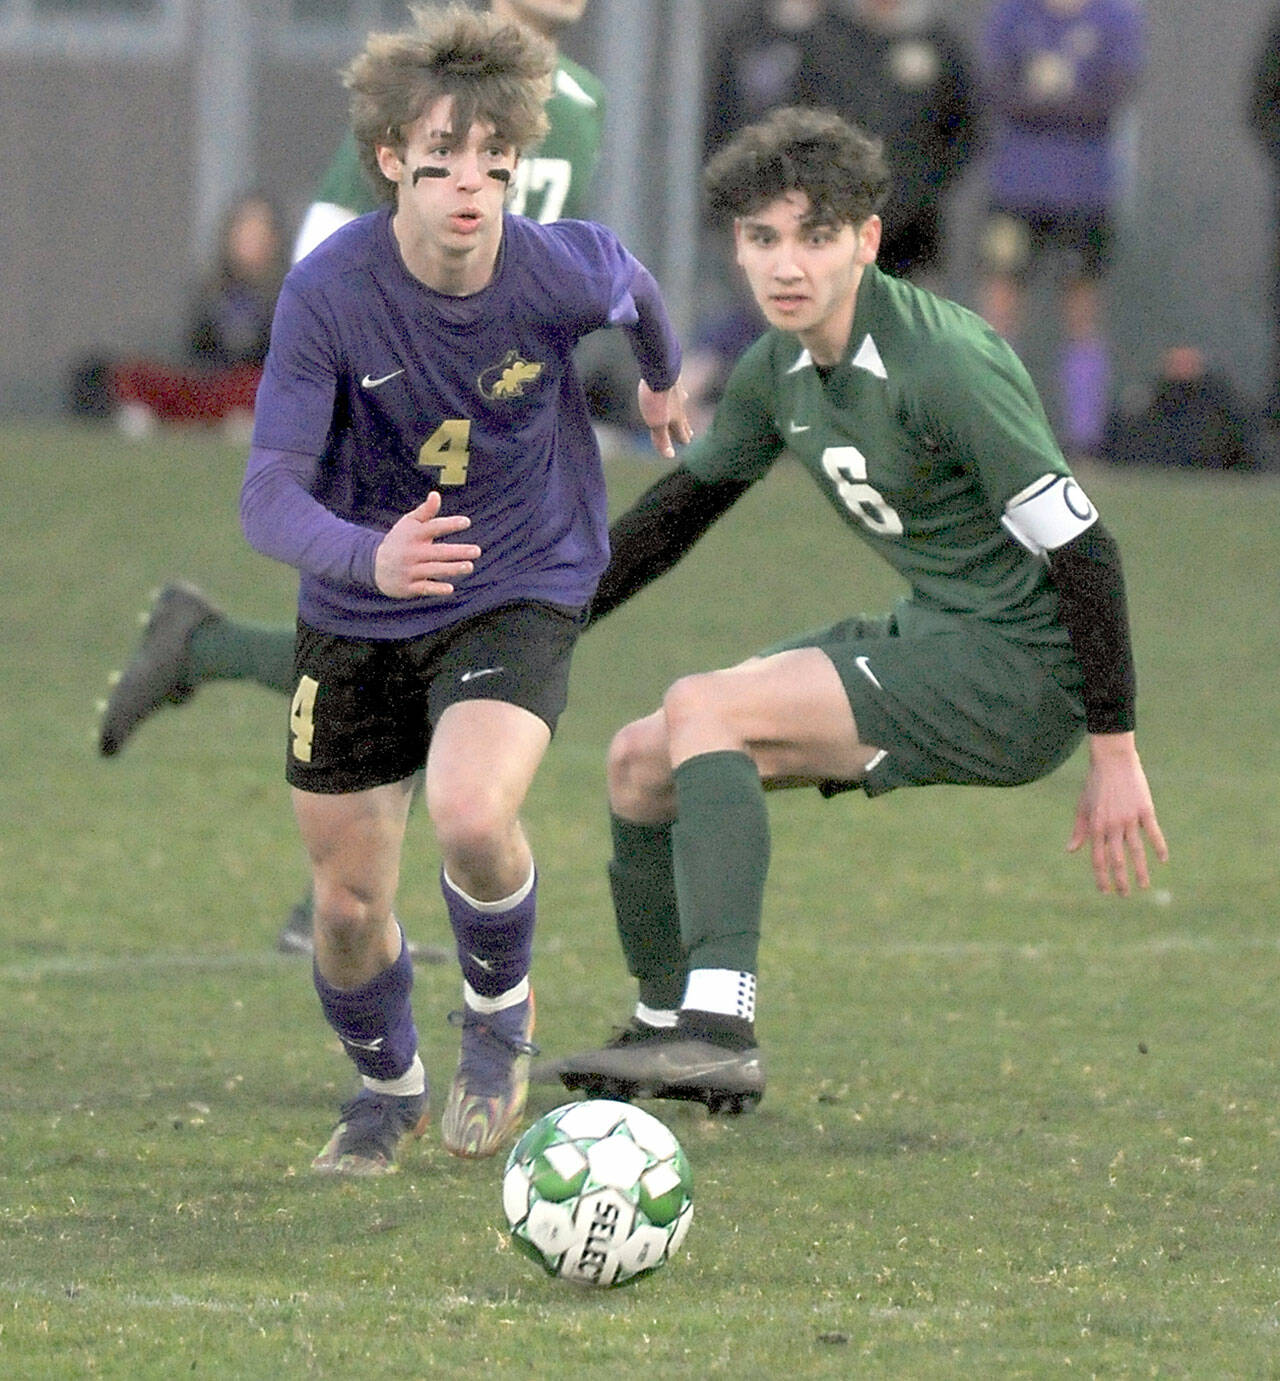 KEITH THORPE/PENINSULA DAILY NEWS Sequim’s Lake Barrett, left, and Port Angeles’ Keane McClain move the ball up the pitch during Thursday’s match at Port Angeles Civic Field.